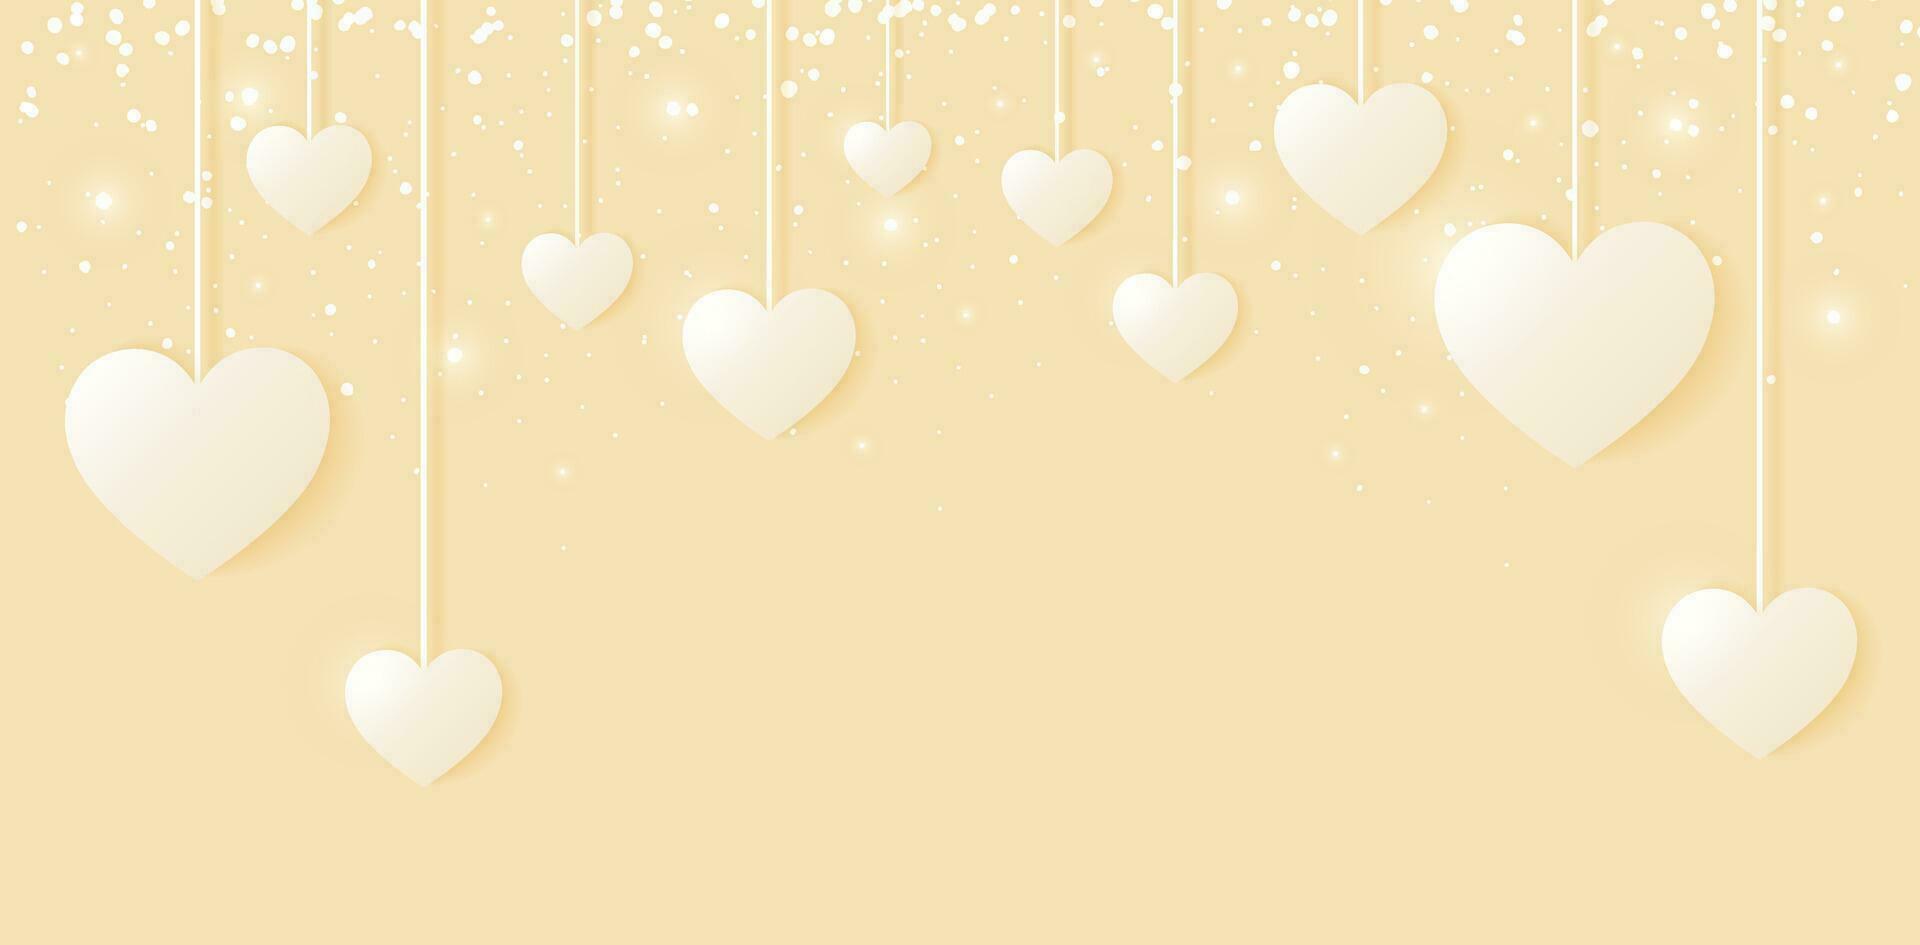 Luxury horizontal background with hearts, flares and glitter on pastel background for web or social media. Poster, banner with empty space for Happy Valentine's Day, Mother's Day, promotion, sale. vector